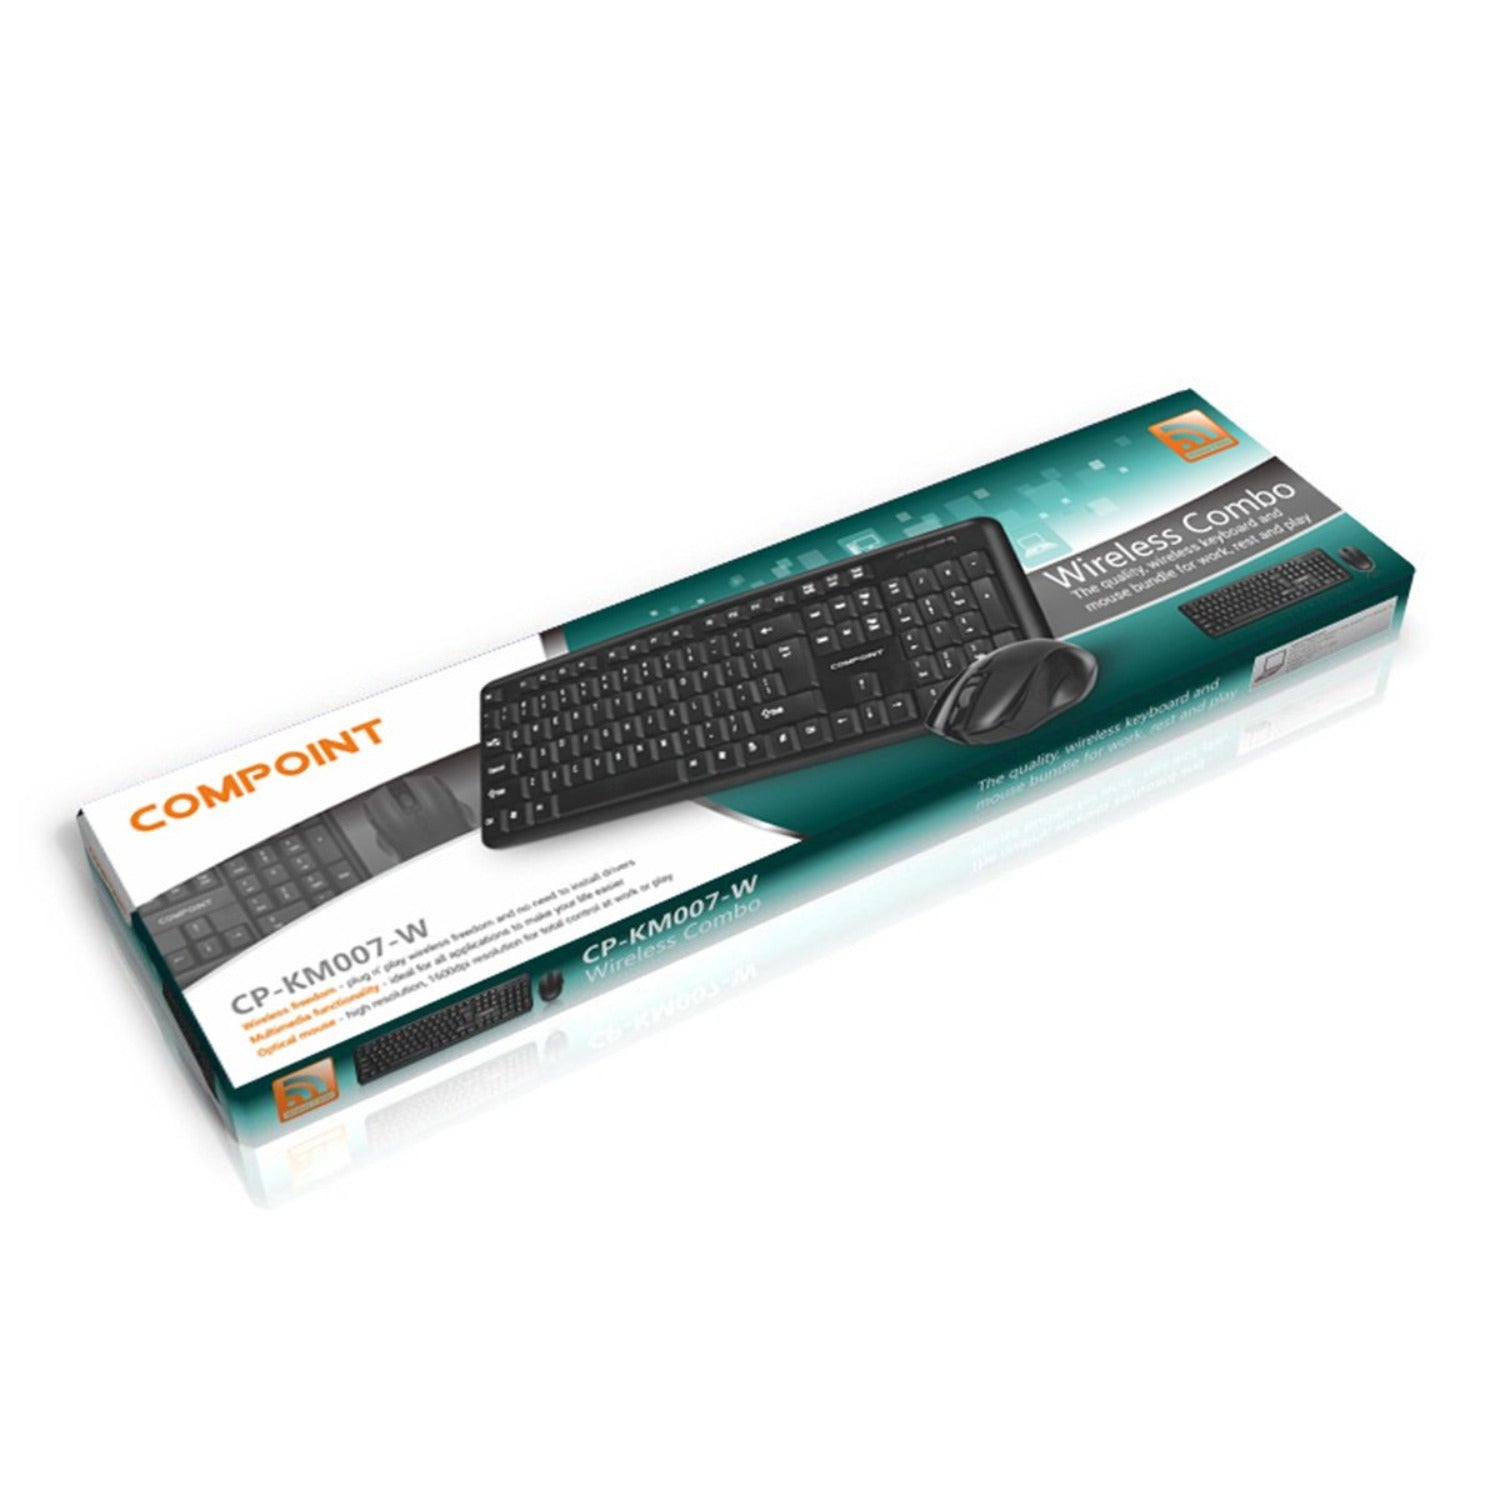 Compoint 2.4Ghz Wireless Keyboard and Mouse Set - Black